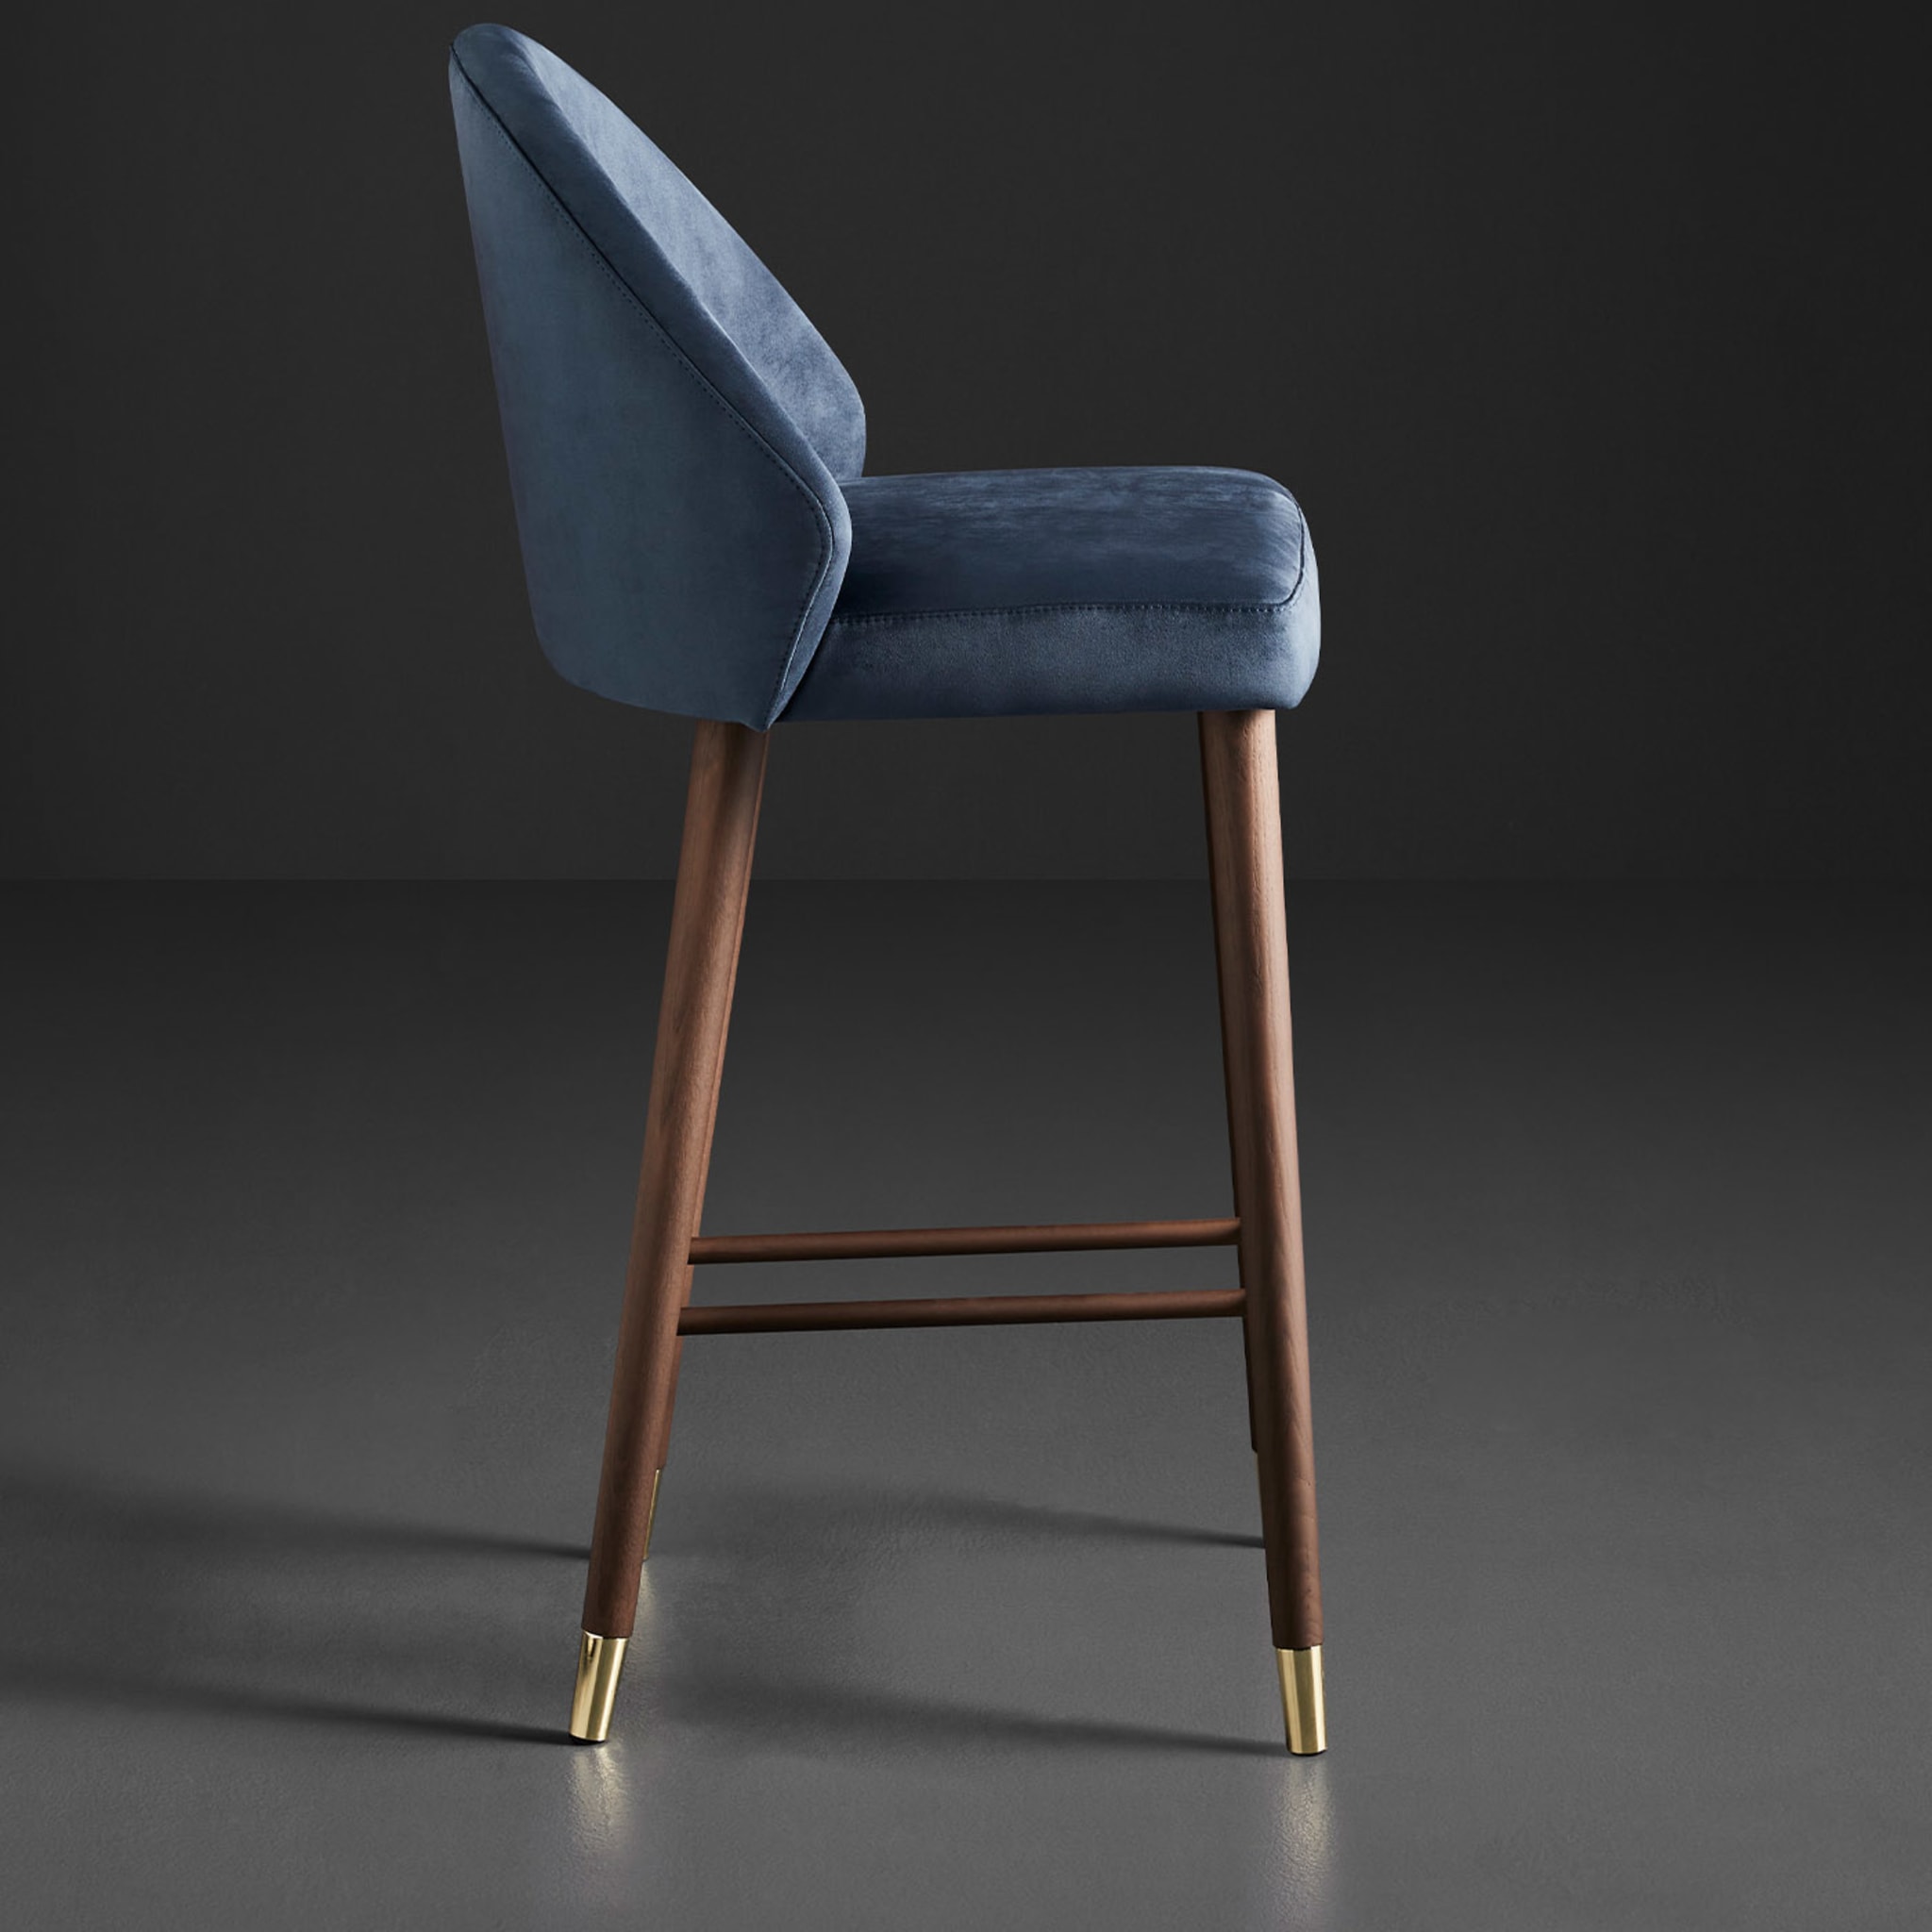 Diana.ss Blue & Brown Stool by W. Colico - Alternative view 1